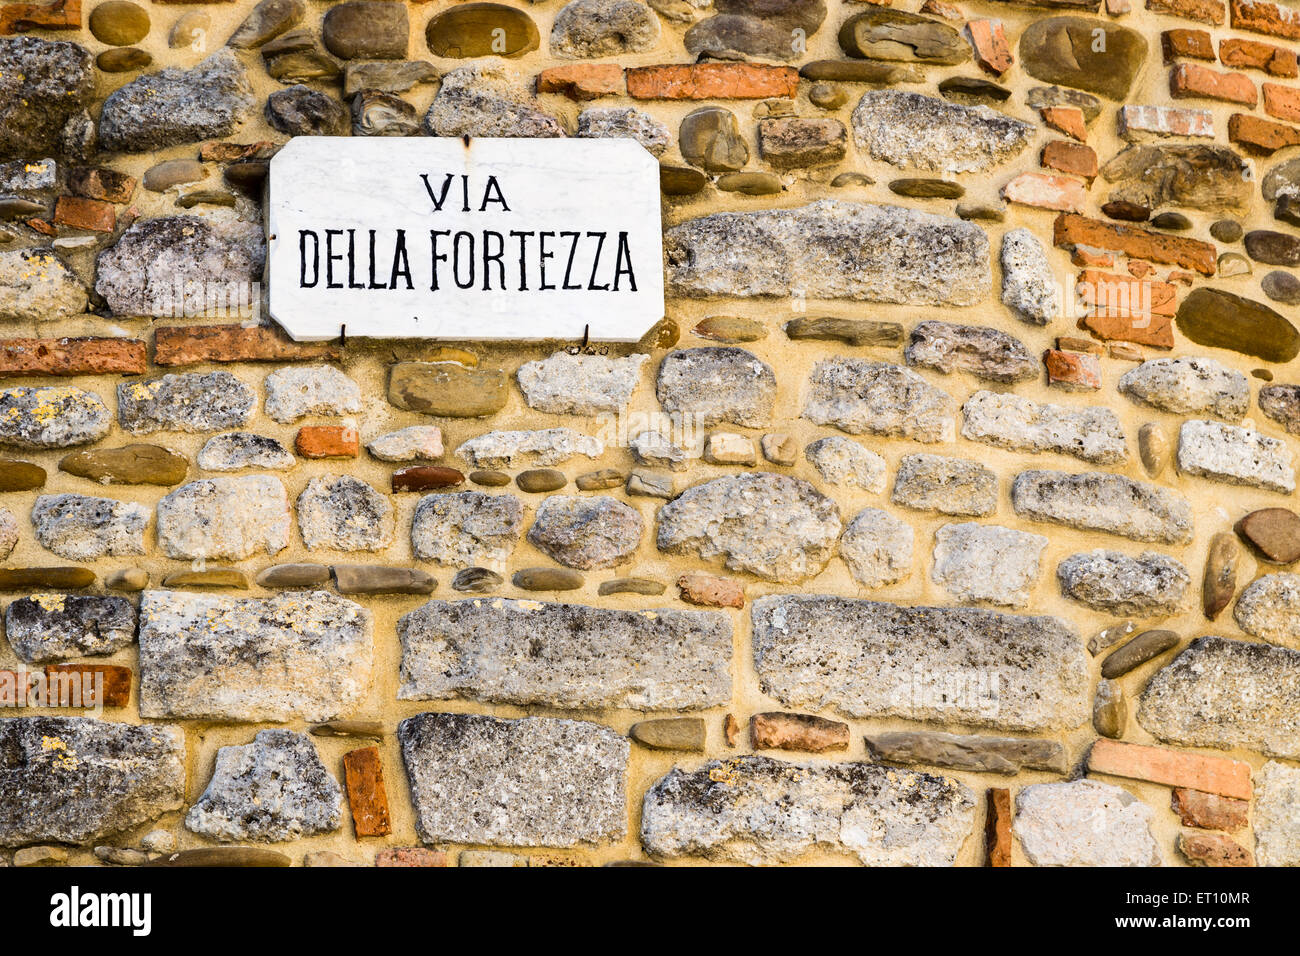 Italian sentence, Via della Fortezza on sign nailed on wall made by smooth stones: meaning is Fortitude road or Fortress road Stock Photo